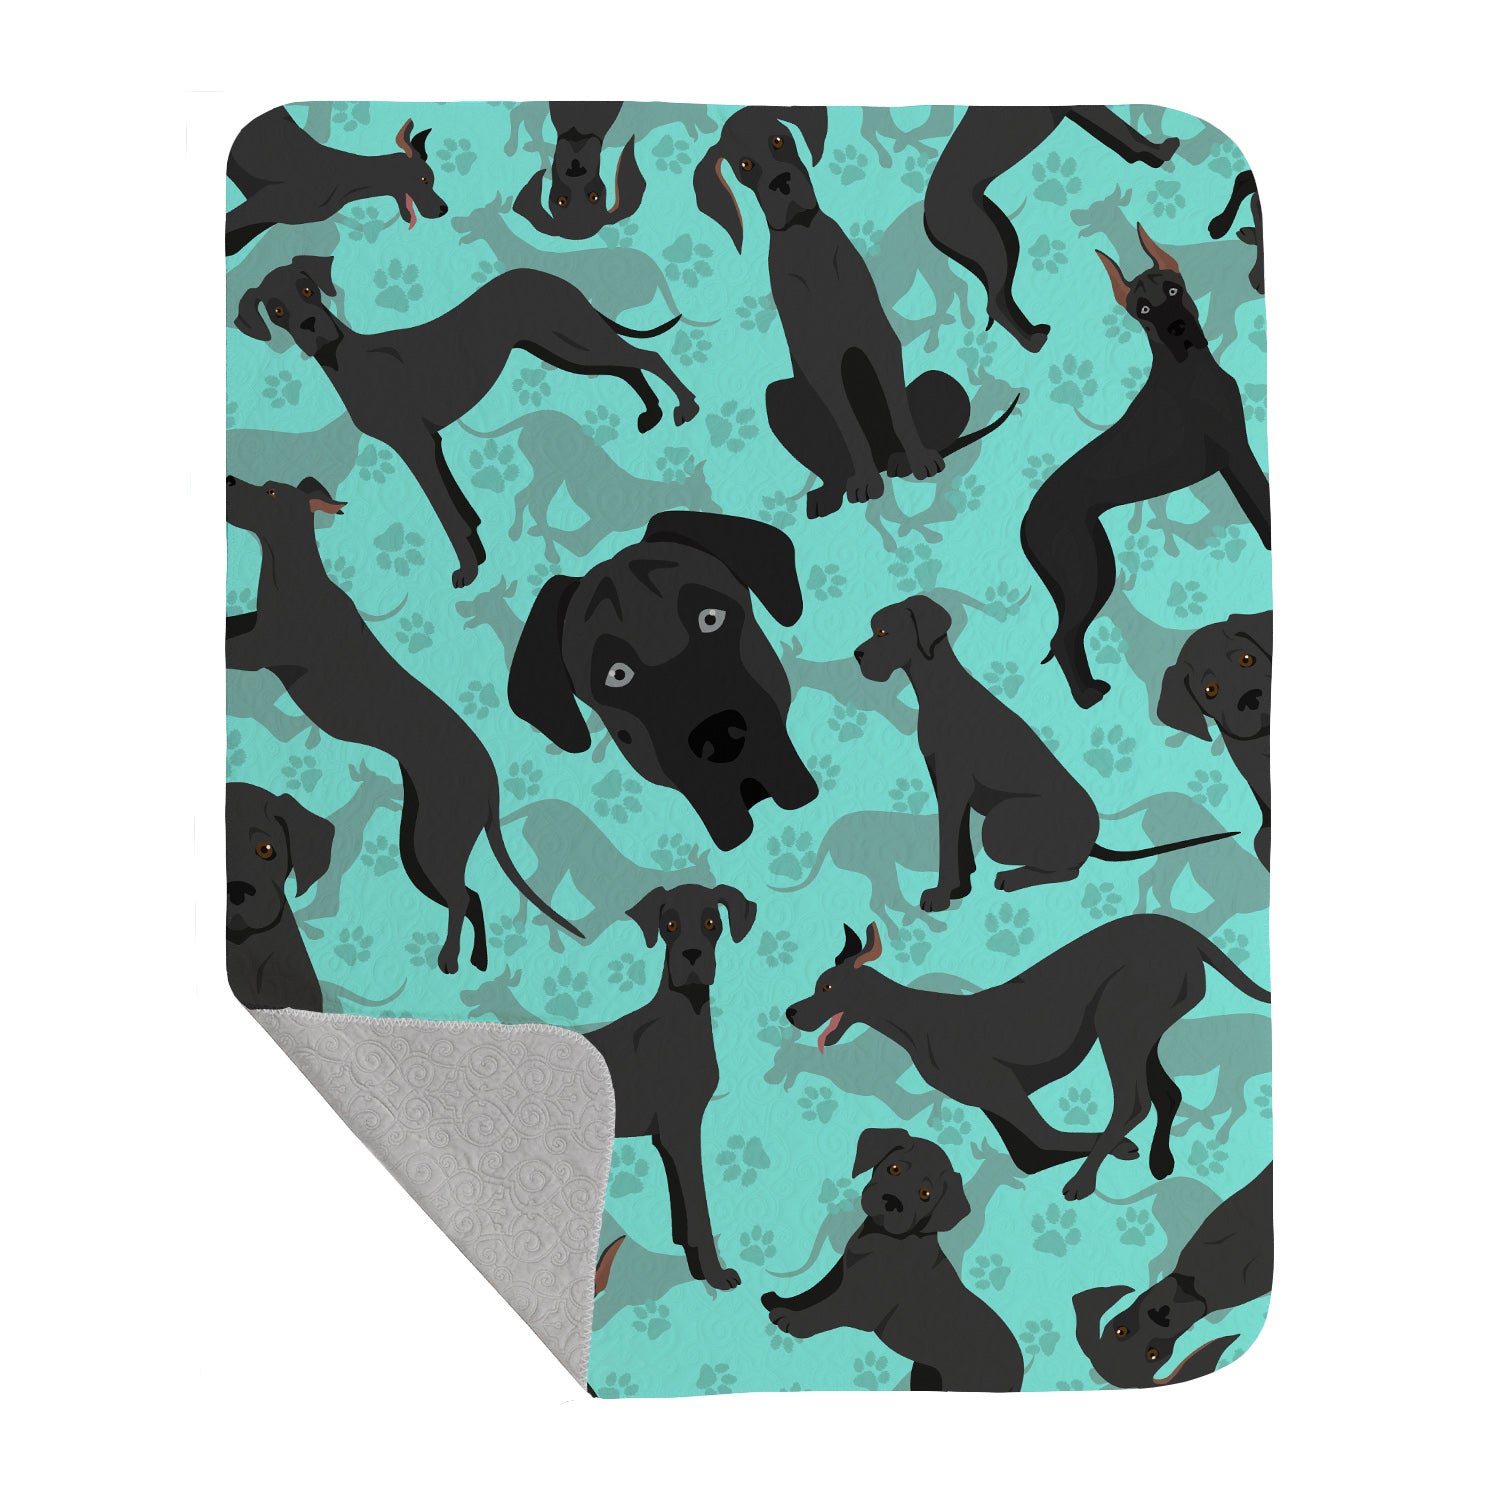 Buy this Black Great Dane Quilted Blanket 50x60